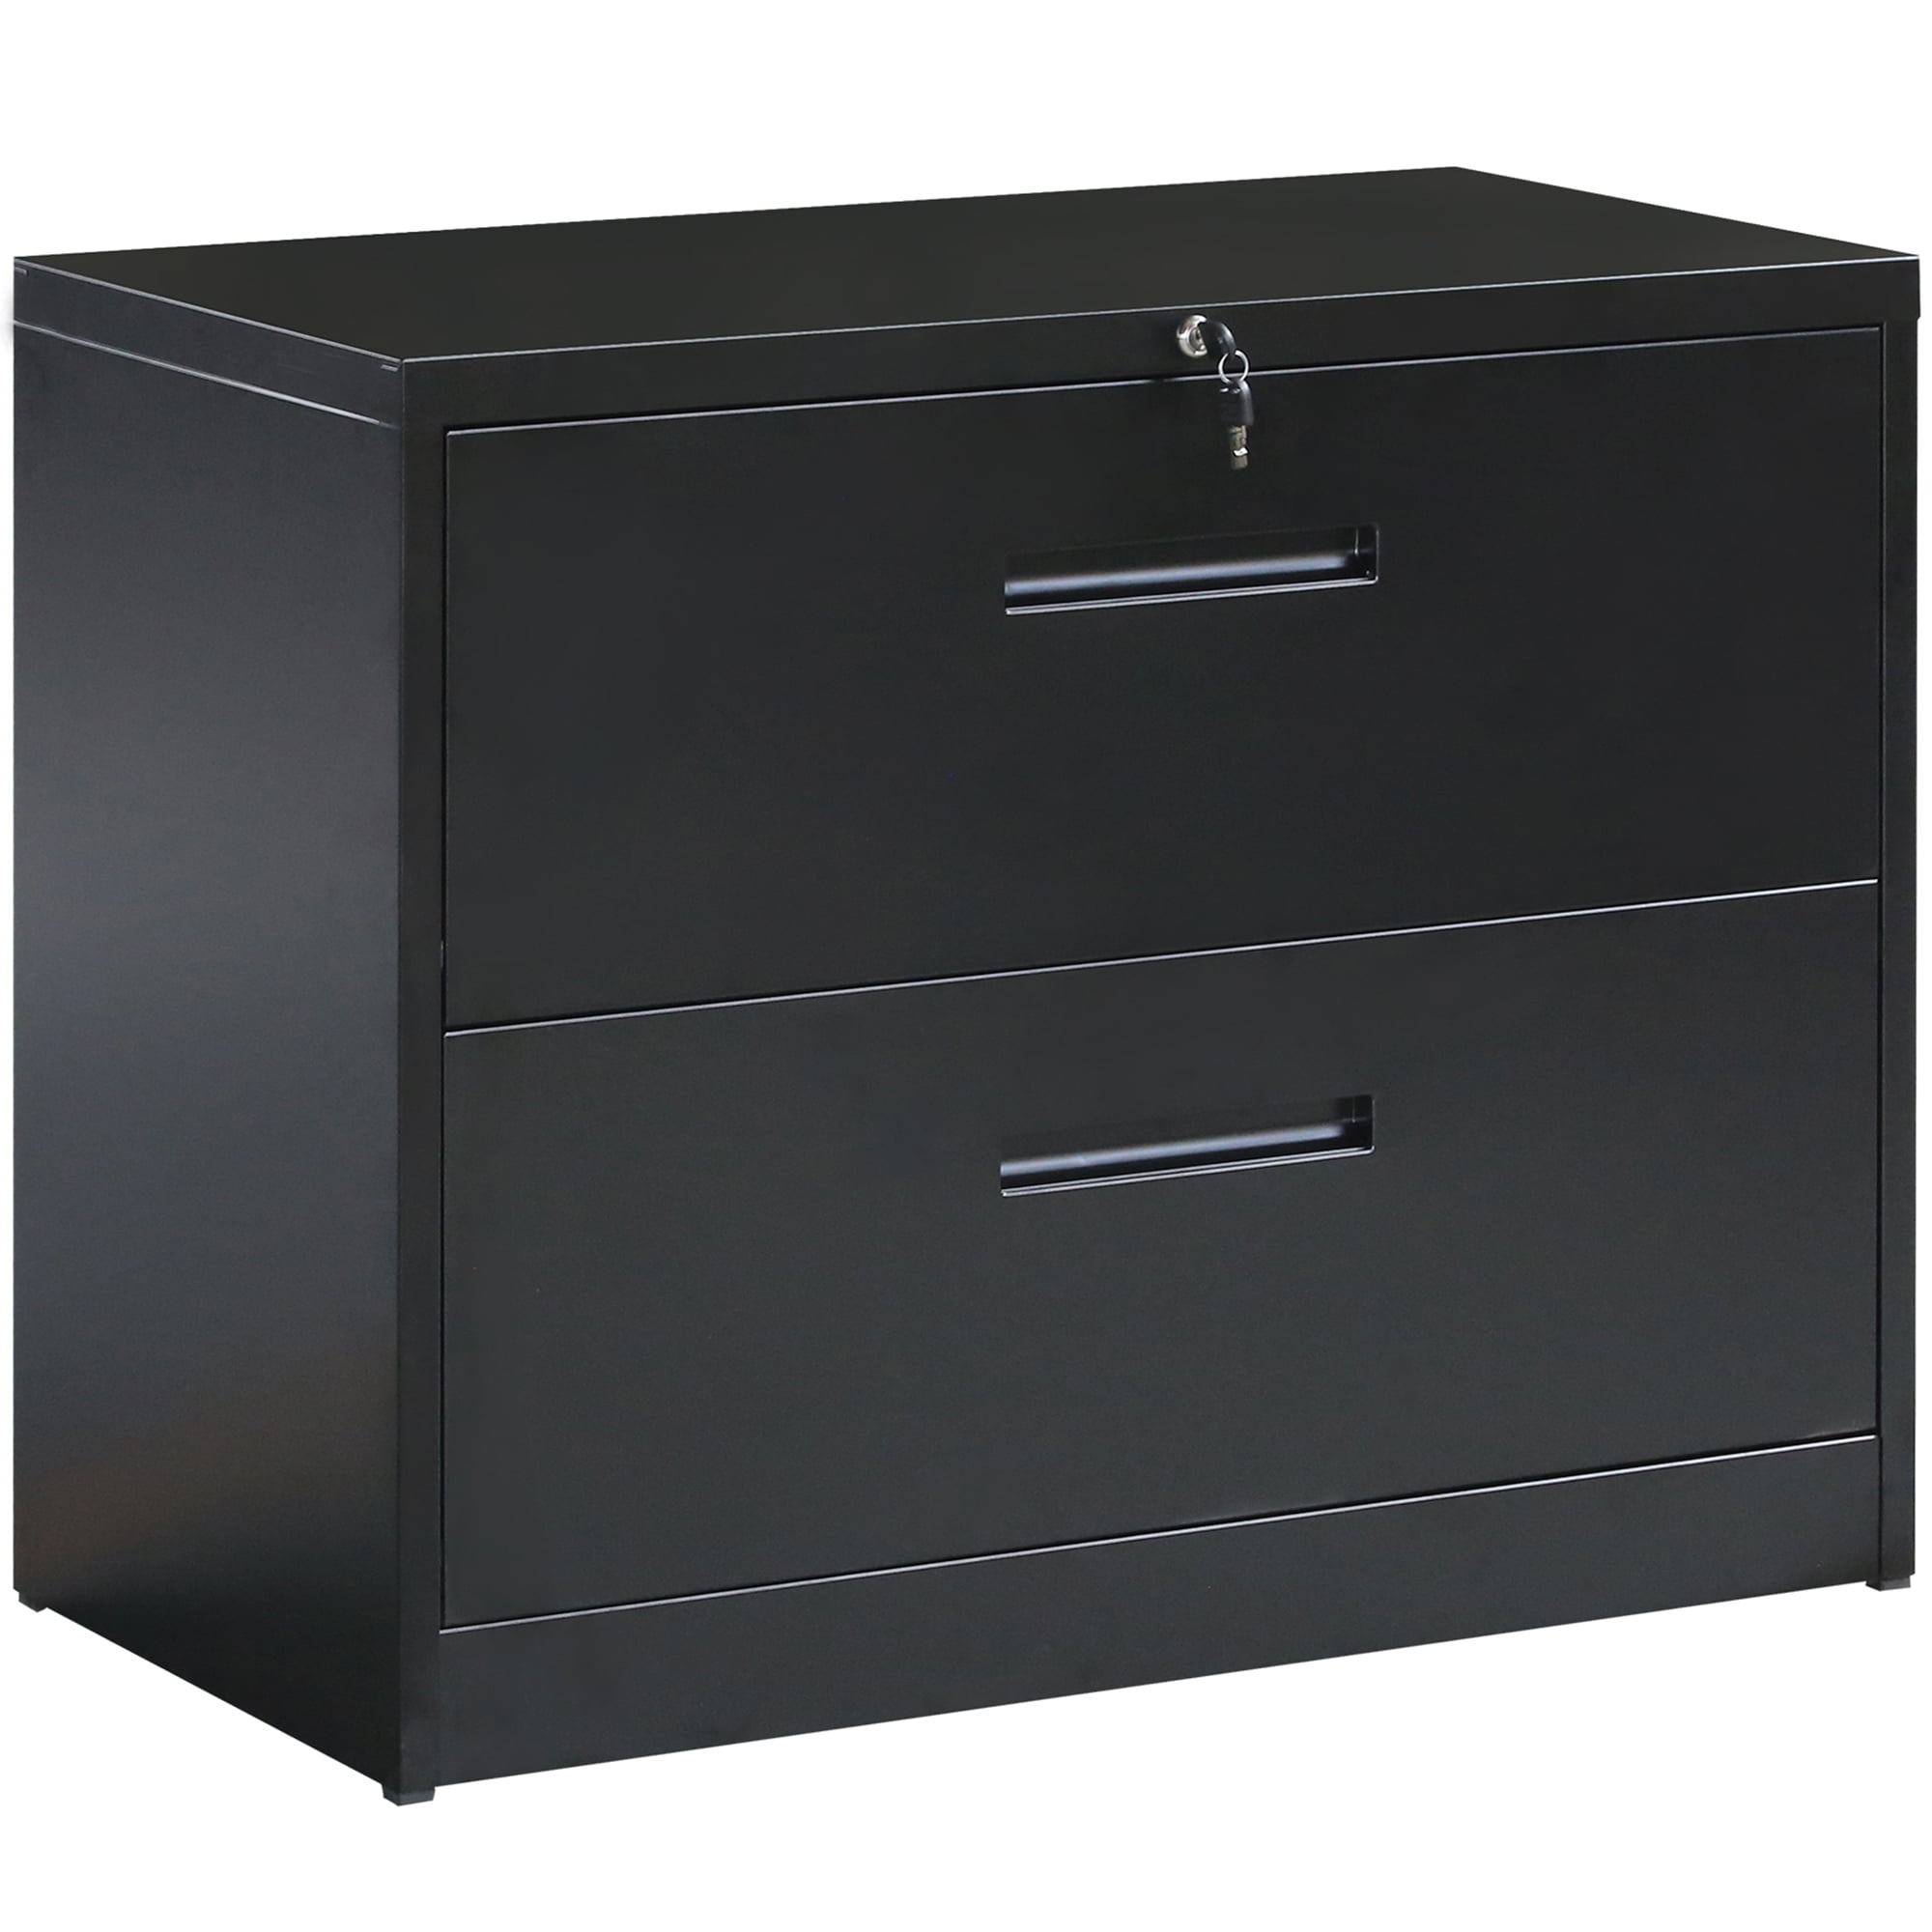 Heavy Duty Lateral Filing Cabinet Black Steel Construction Lateral File Cabinet 3 Drawers with Lock 